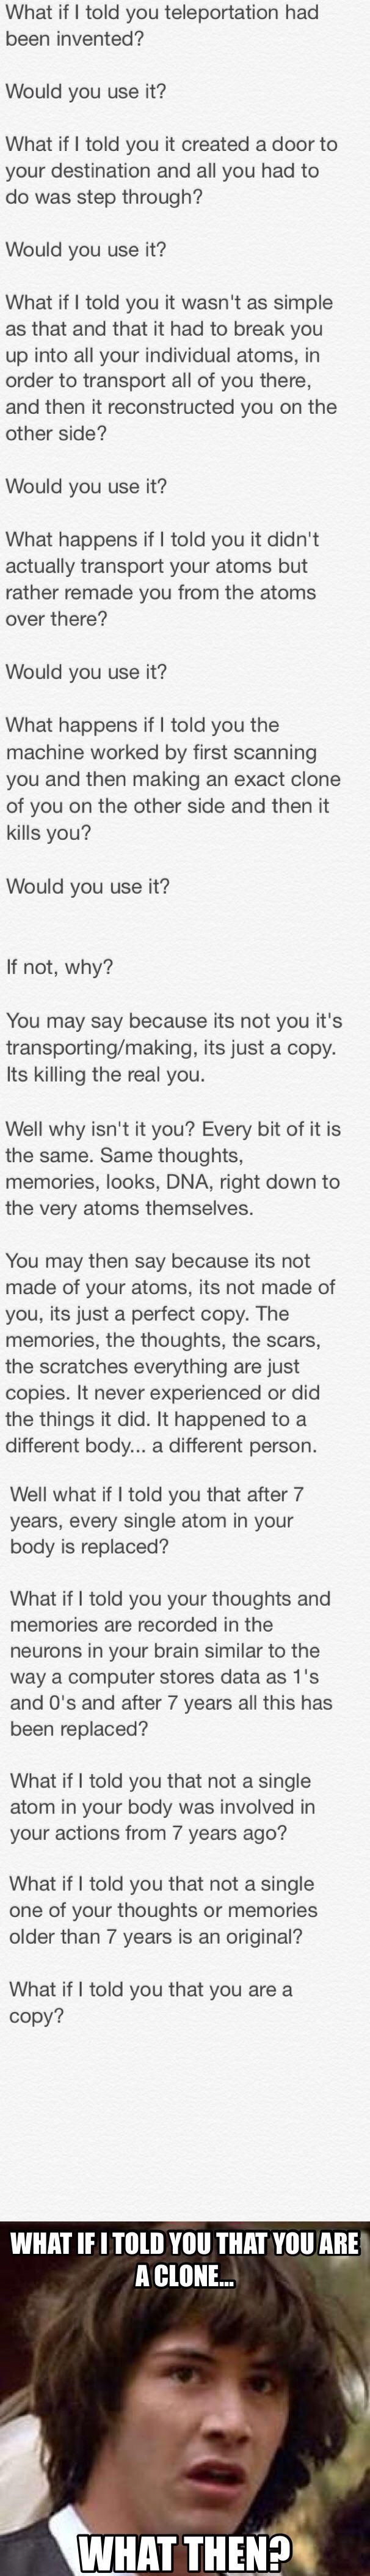 think about this for a moment..